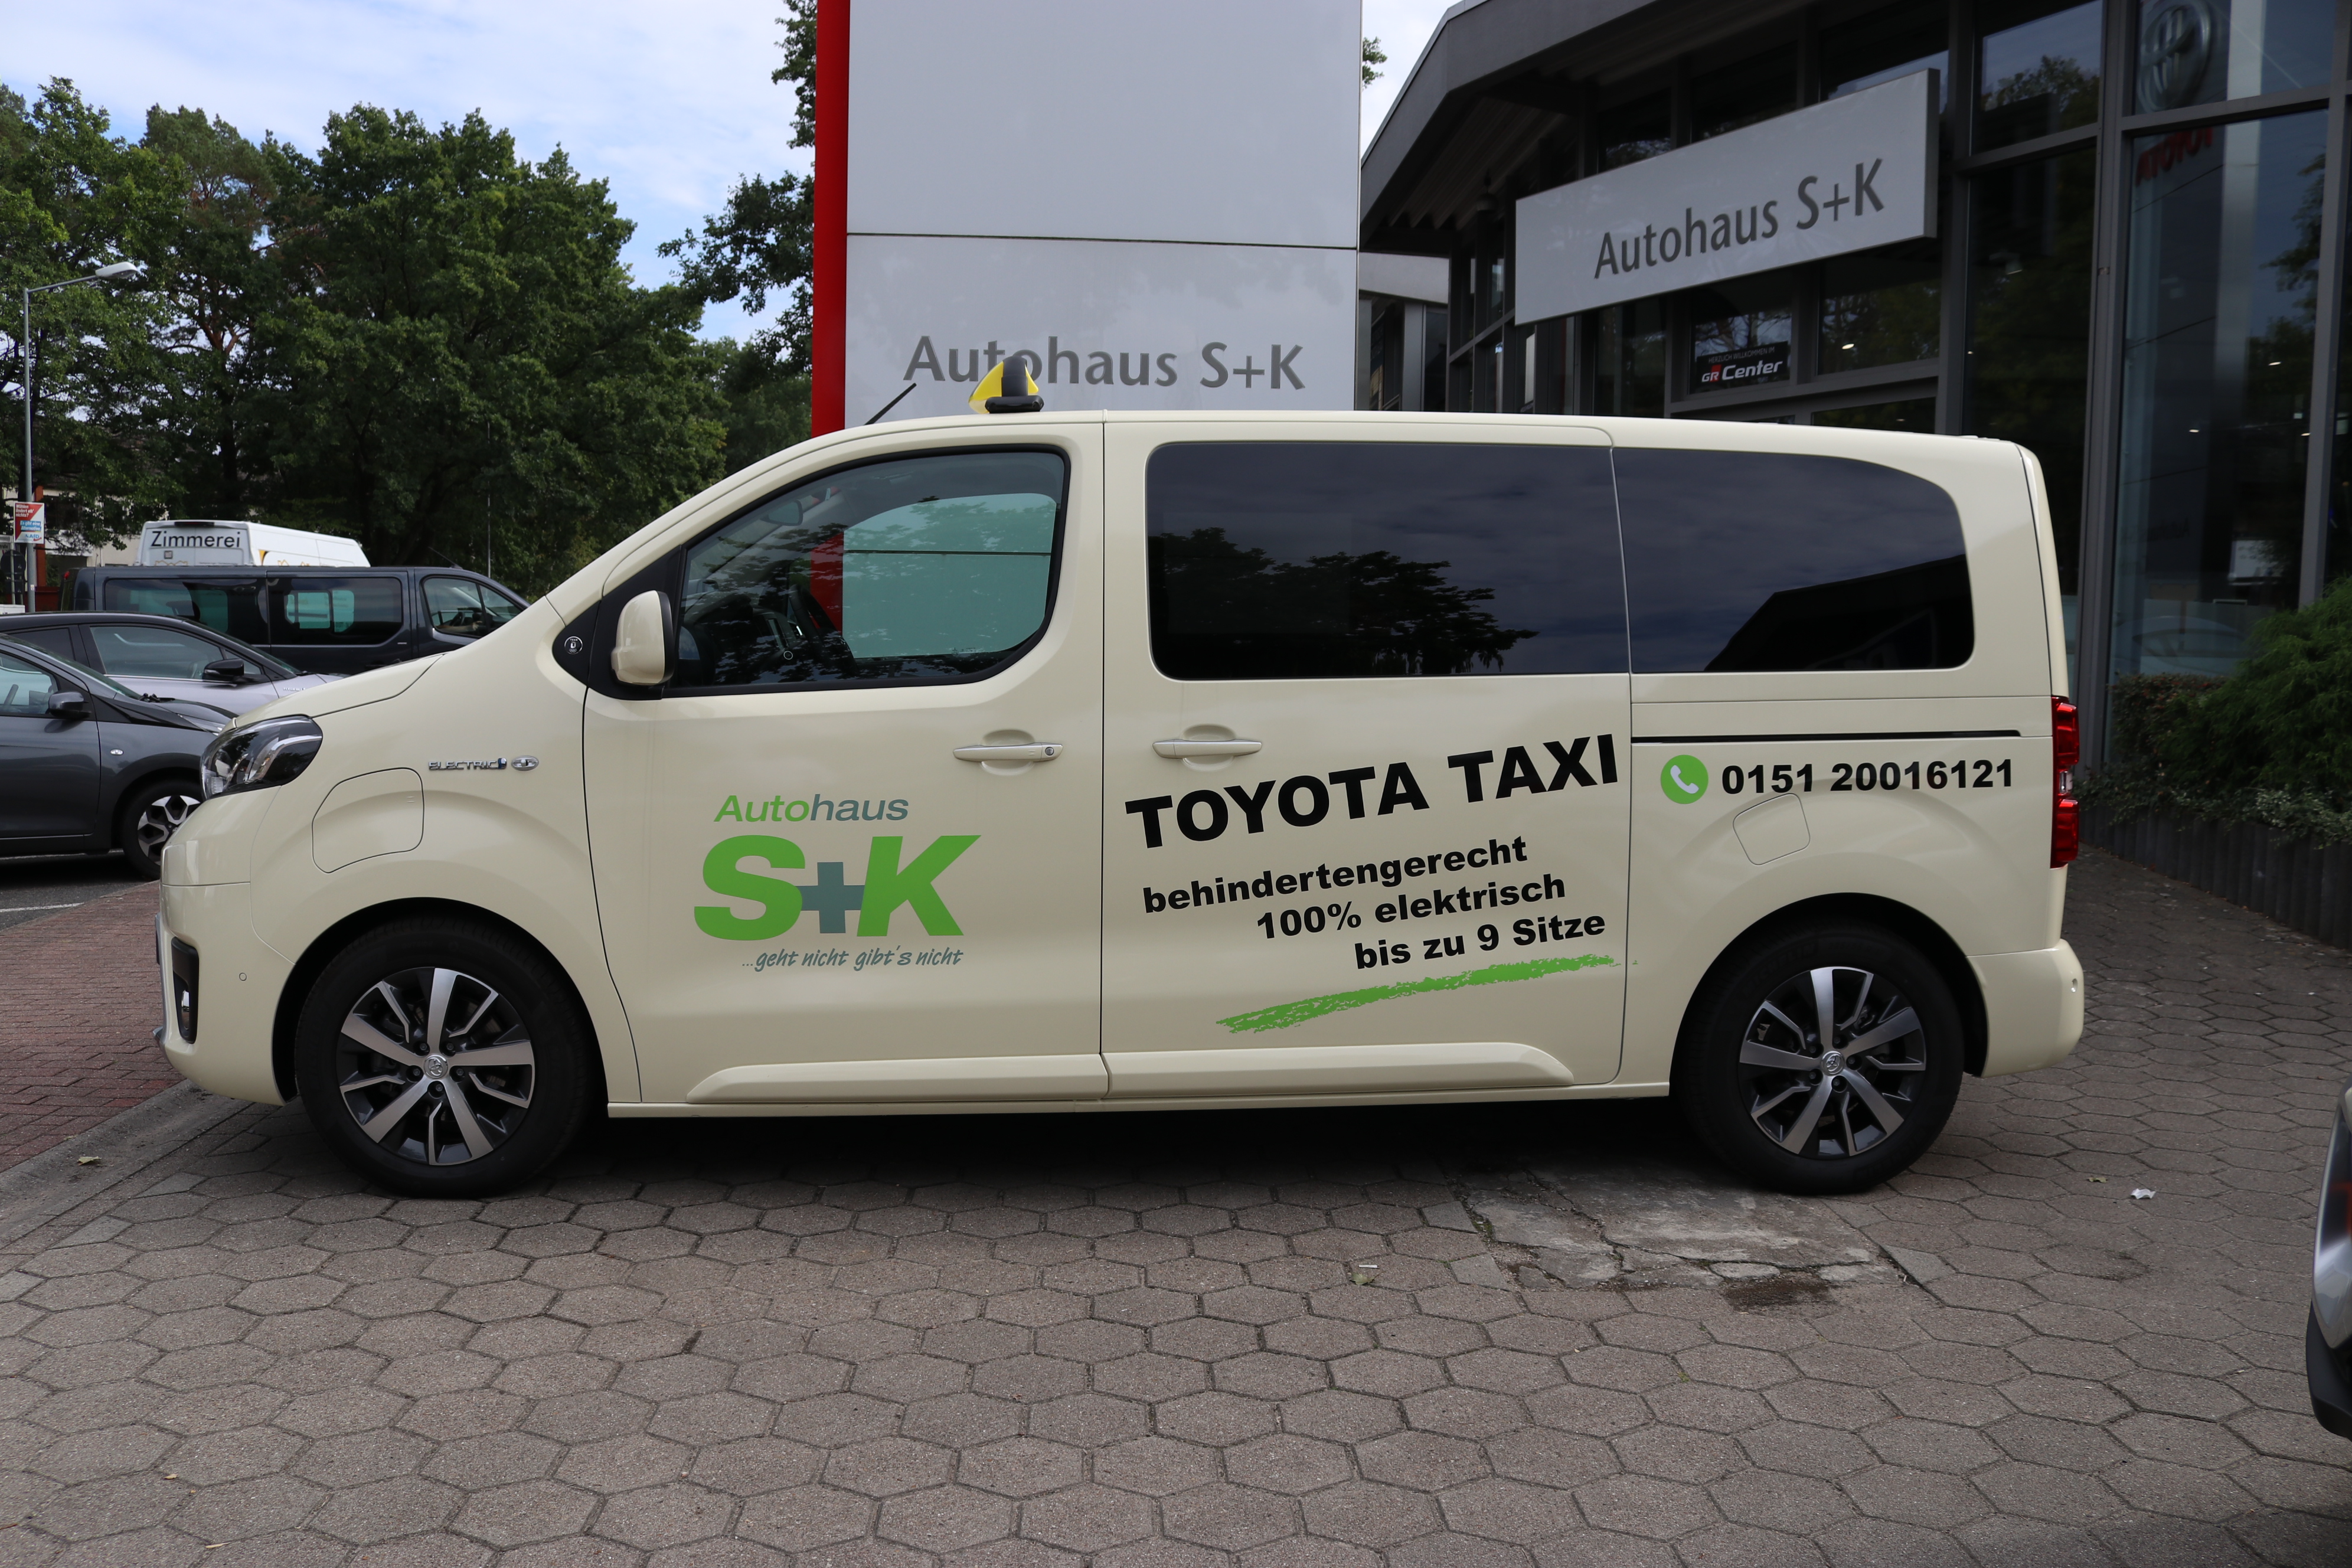 Toyota PROACE VERSO ELECTRIC Taxi mit Inklusionsumbau